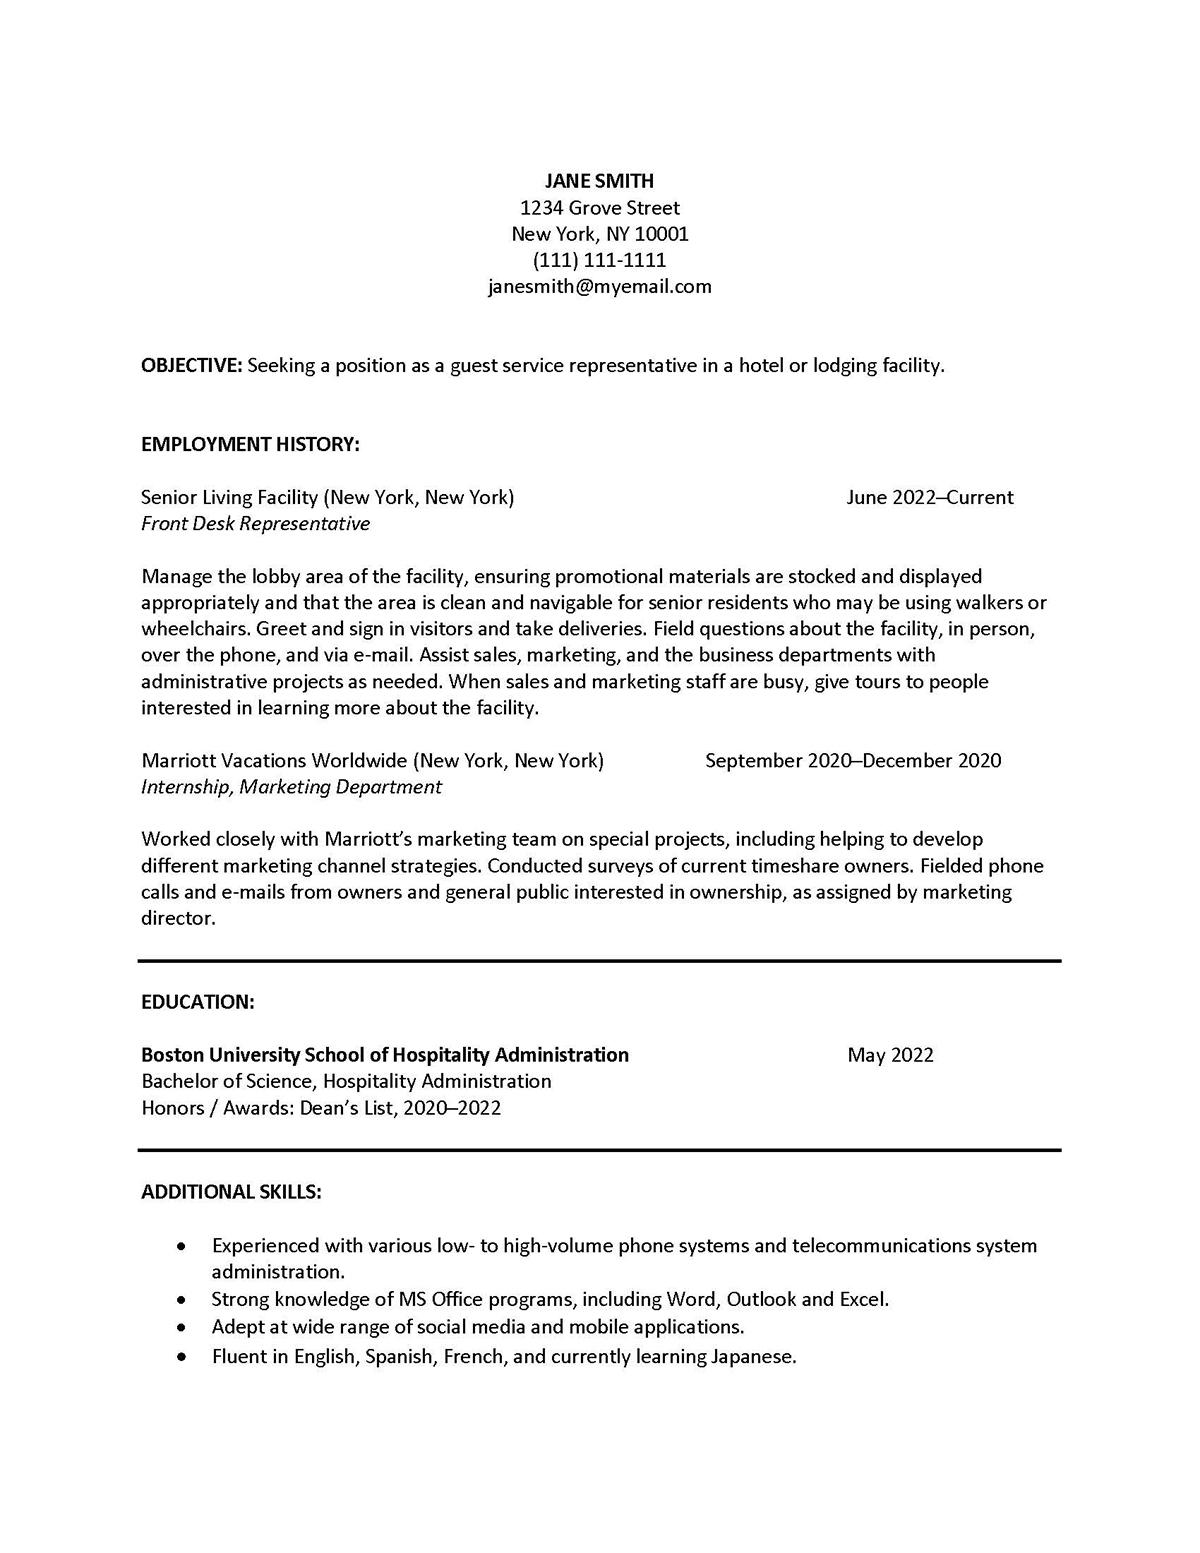 Sample resume: Hospitality, Low Experience, Chronological